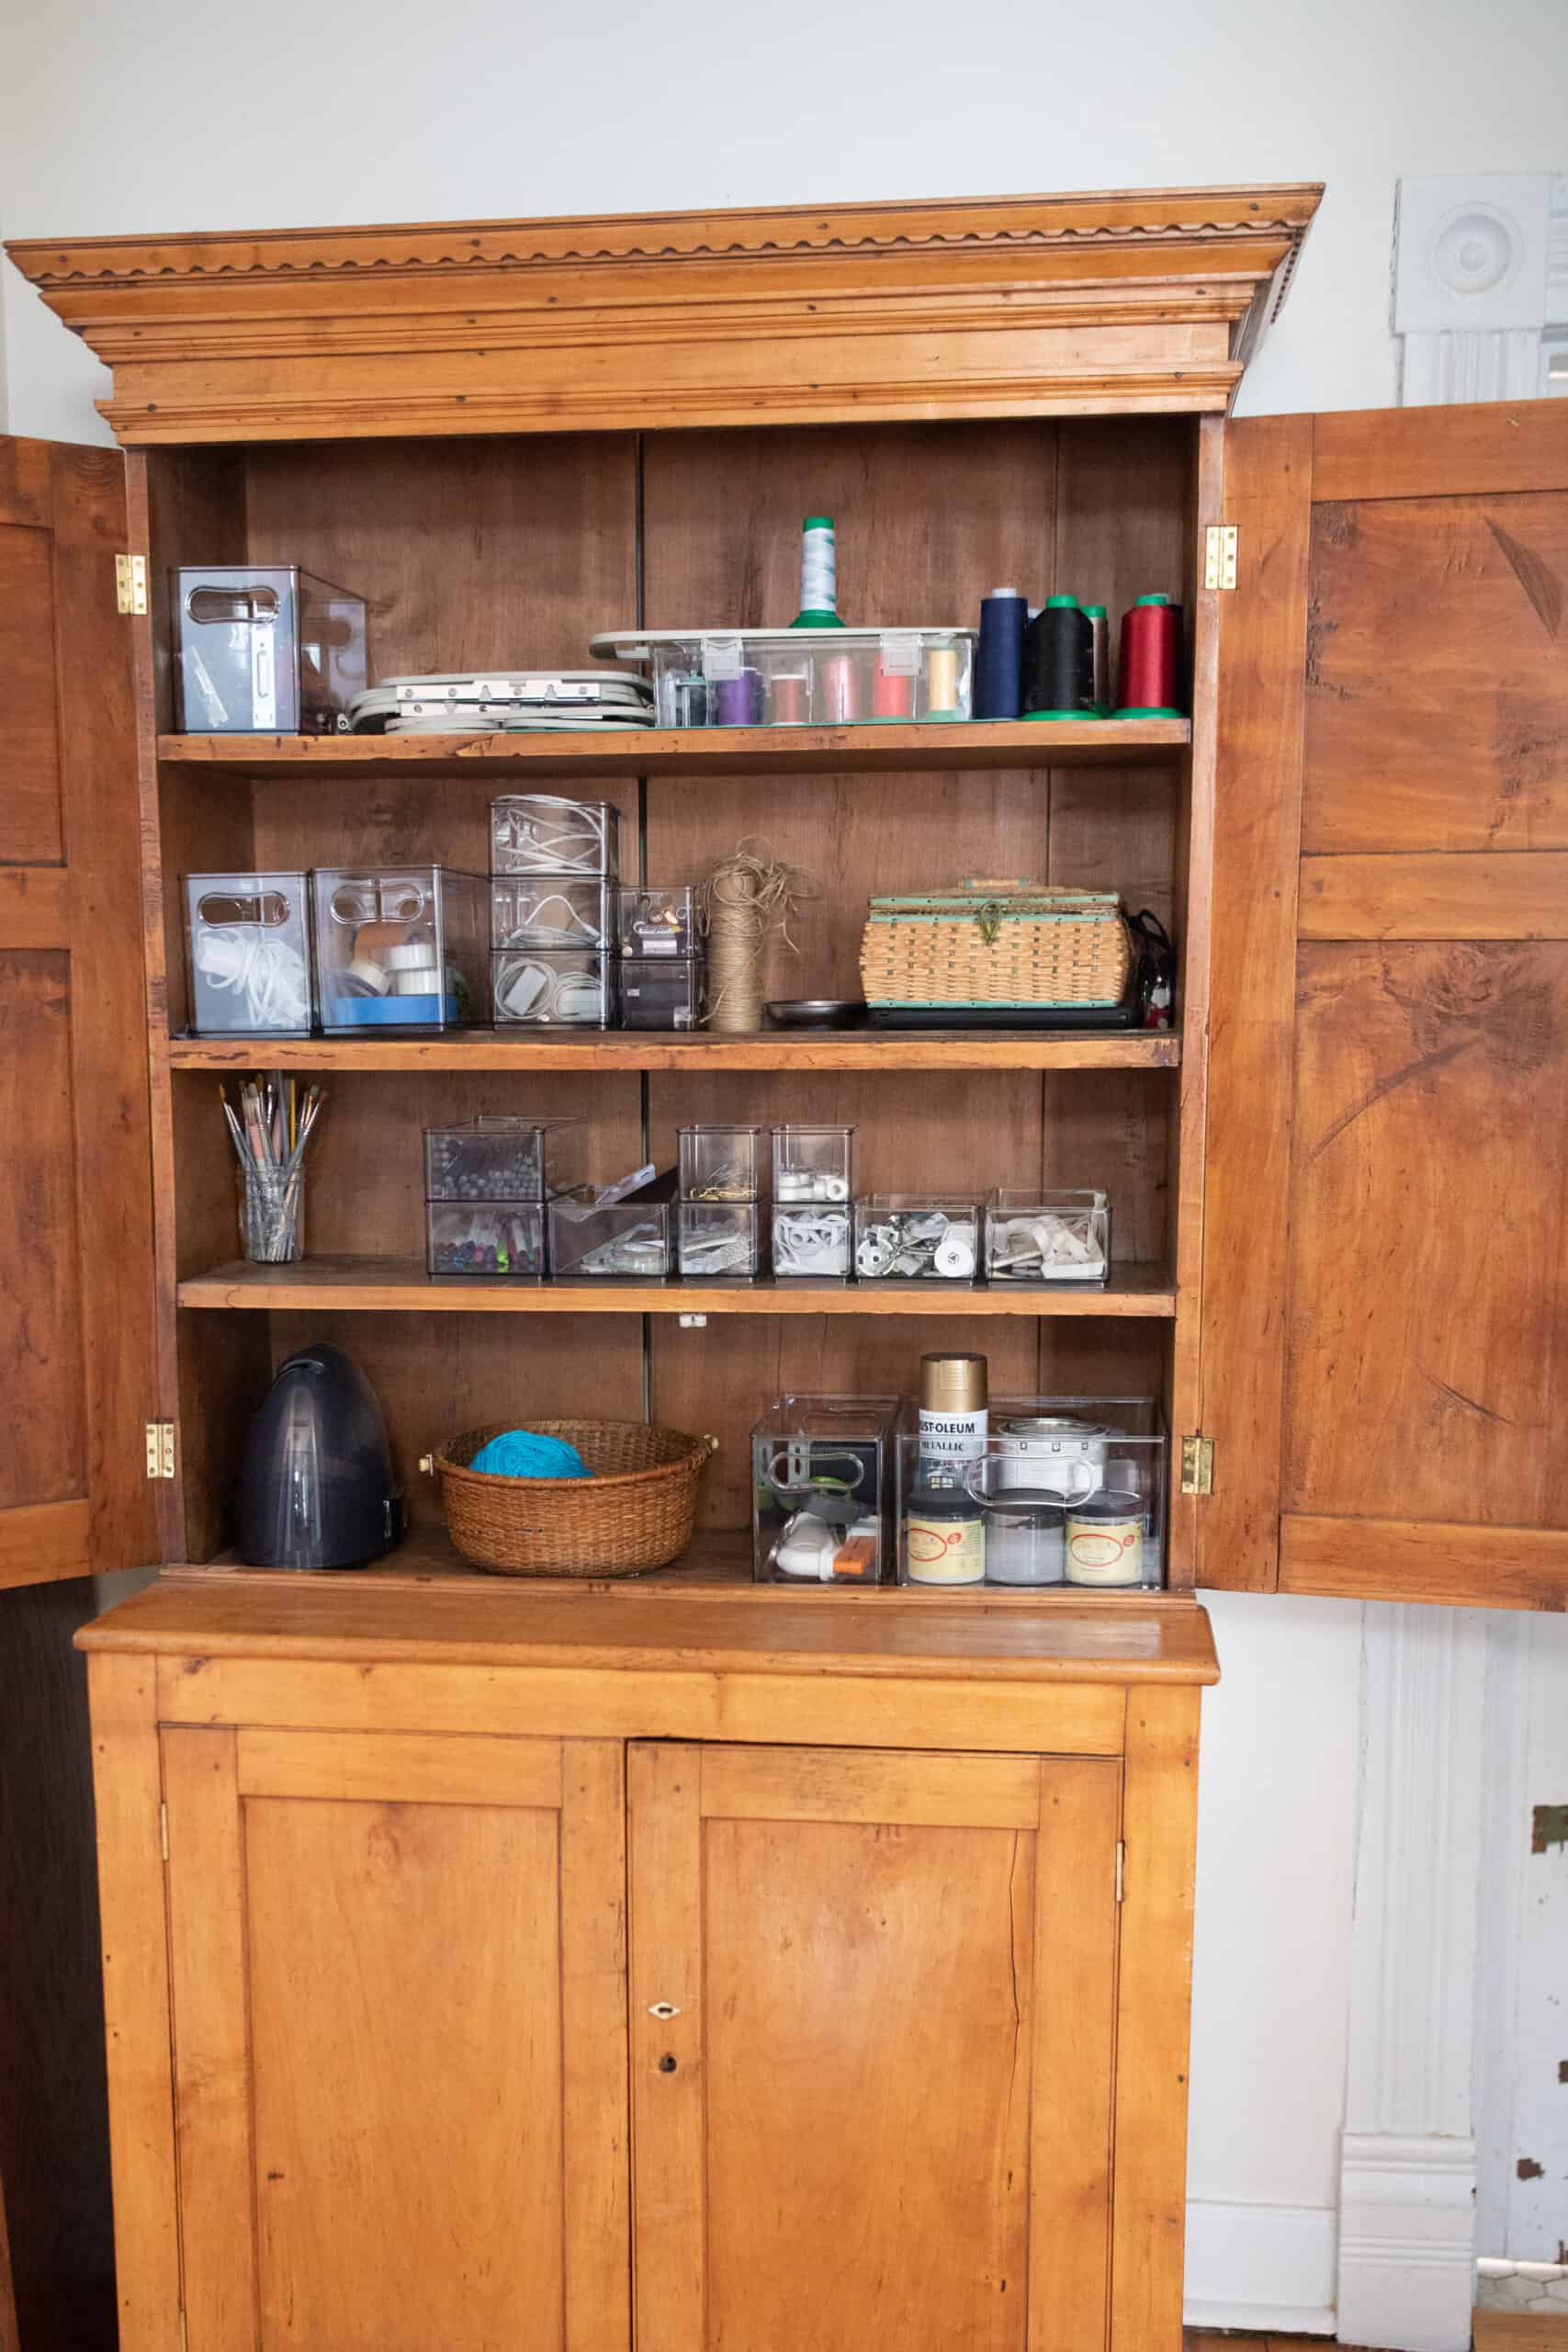 an organized antique wooden cabinet storing craft and sewing items in baskets, jars, and clear bins